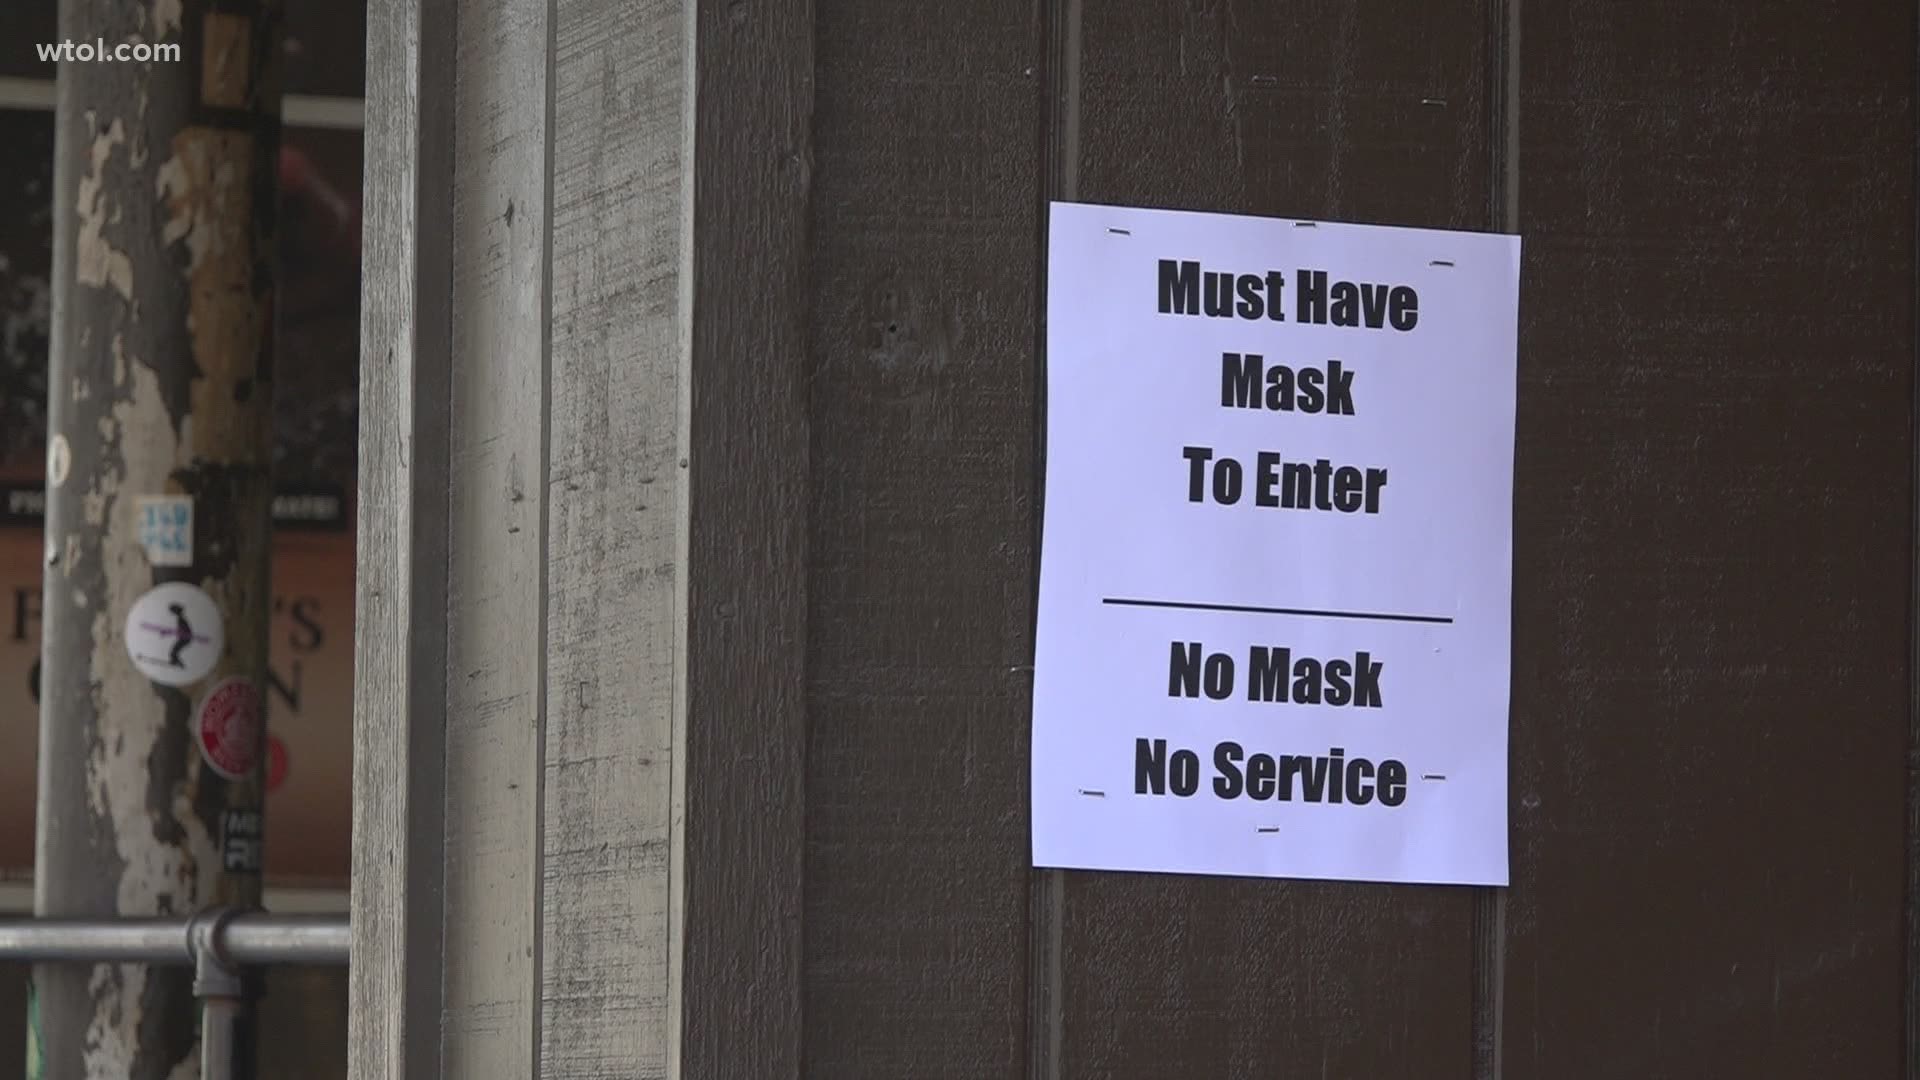 Although there is a mask mandate in the Wood County right now, that could change if the number of coronavirus cases go down.